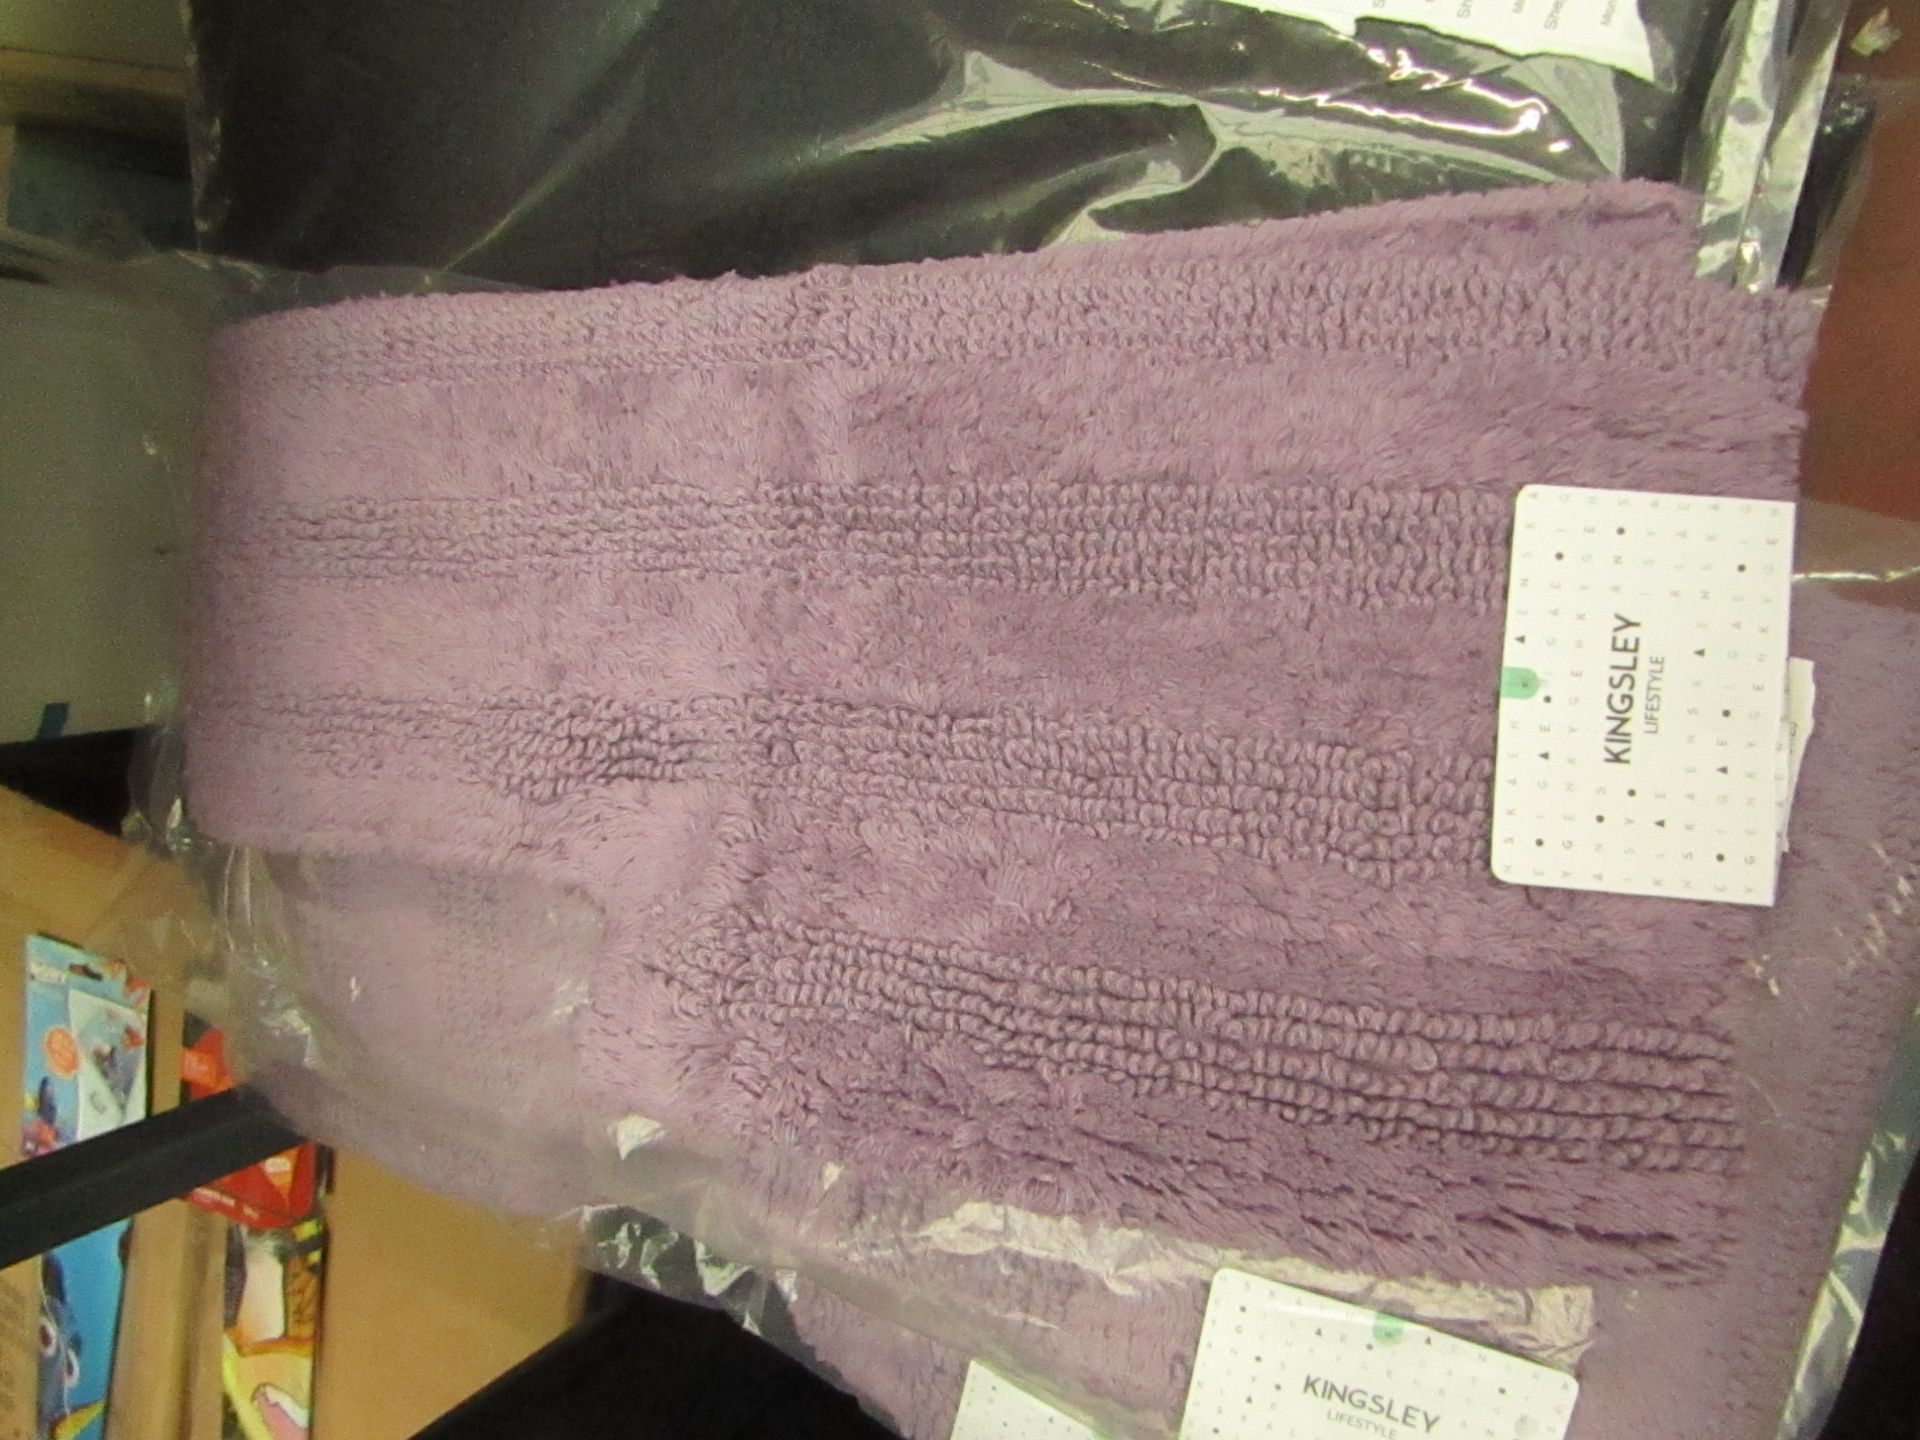 Pack of 2 Kingsley Pedestal Mats in Purple.New with Tags